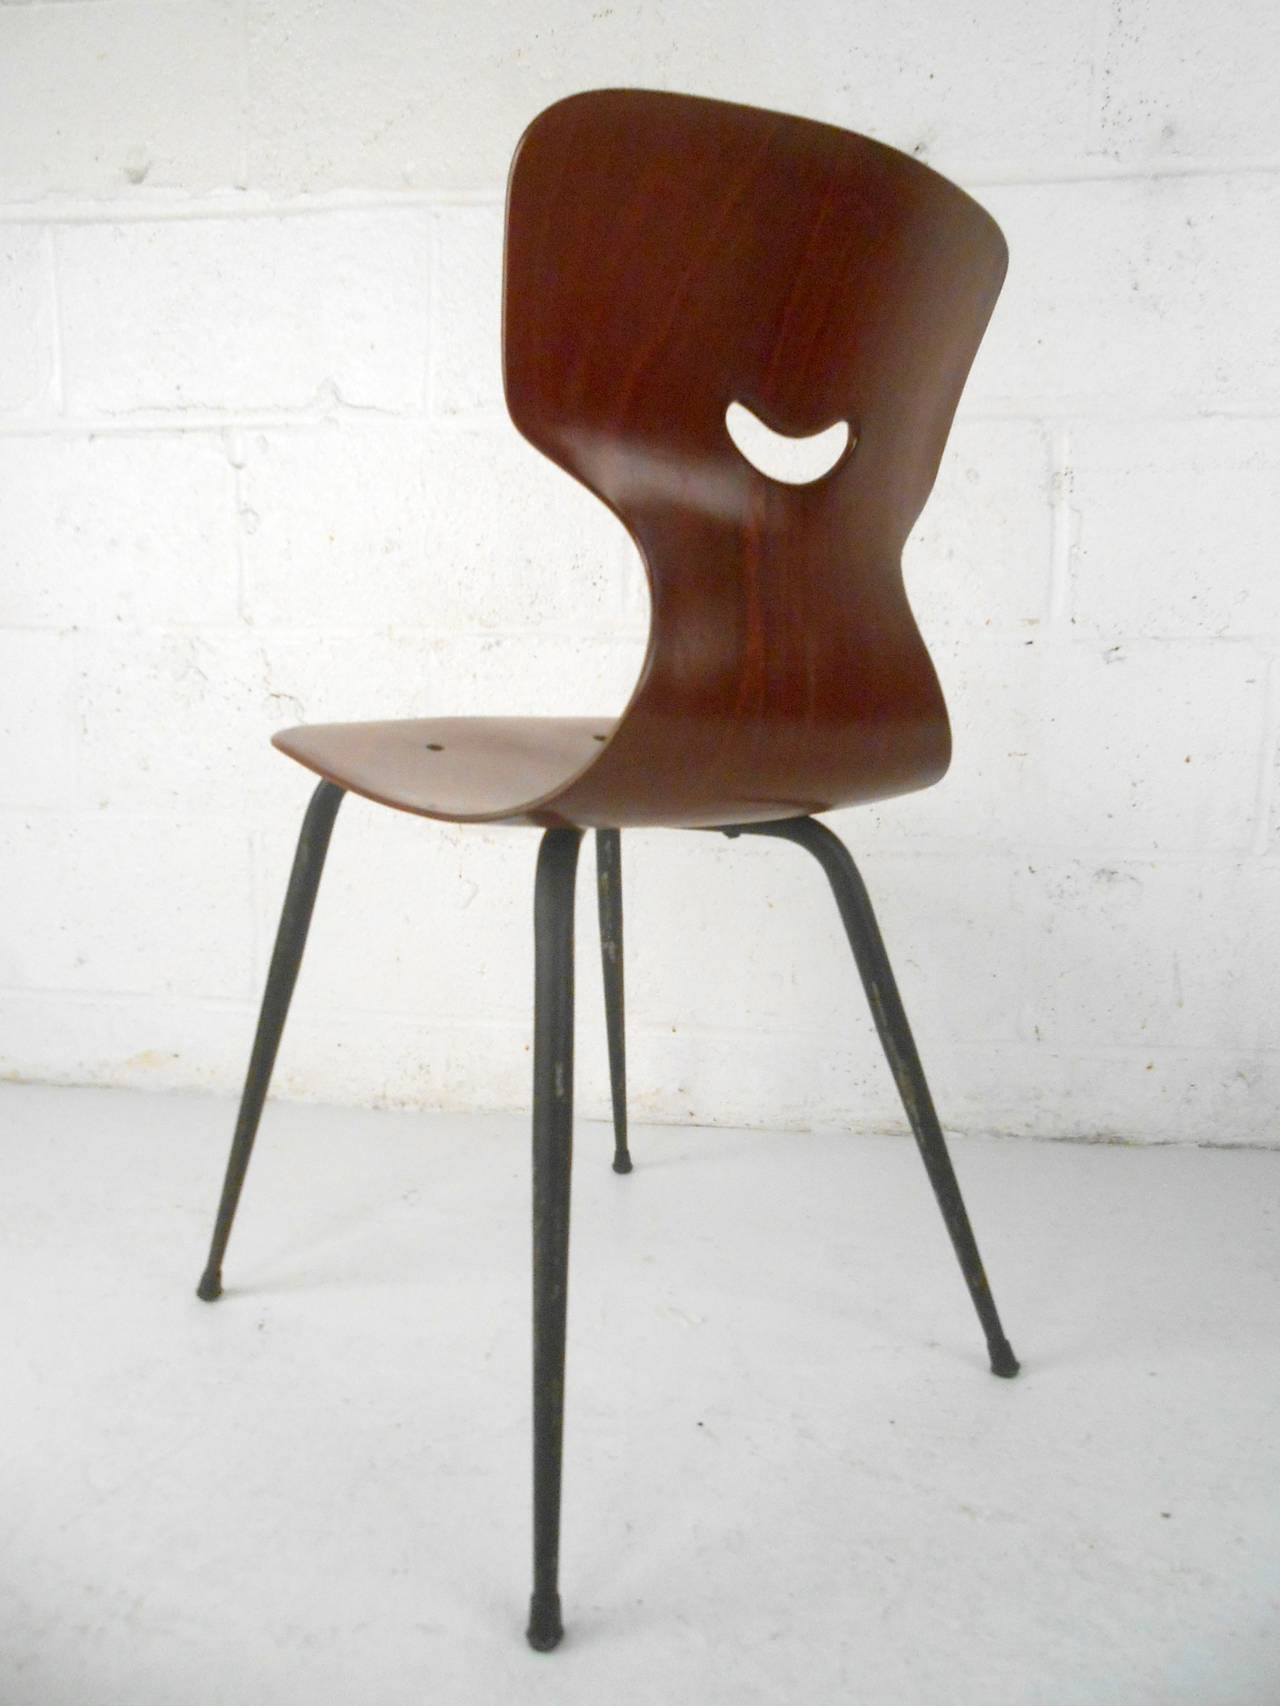 Five Adam Stegner Sculpted Dining Chairs for Pagholz Flötotto For Sale 1